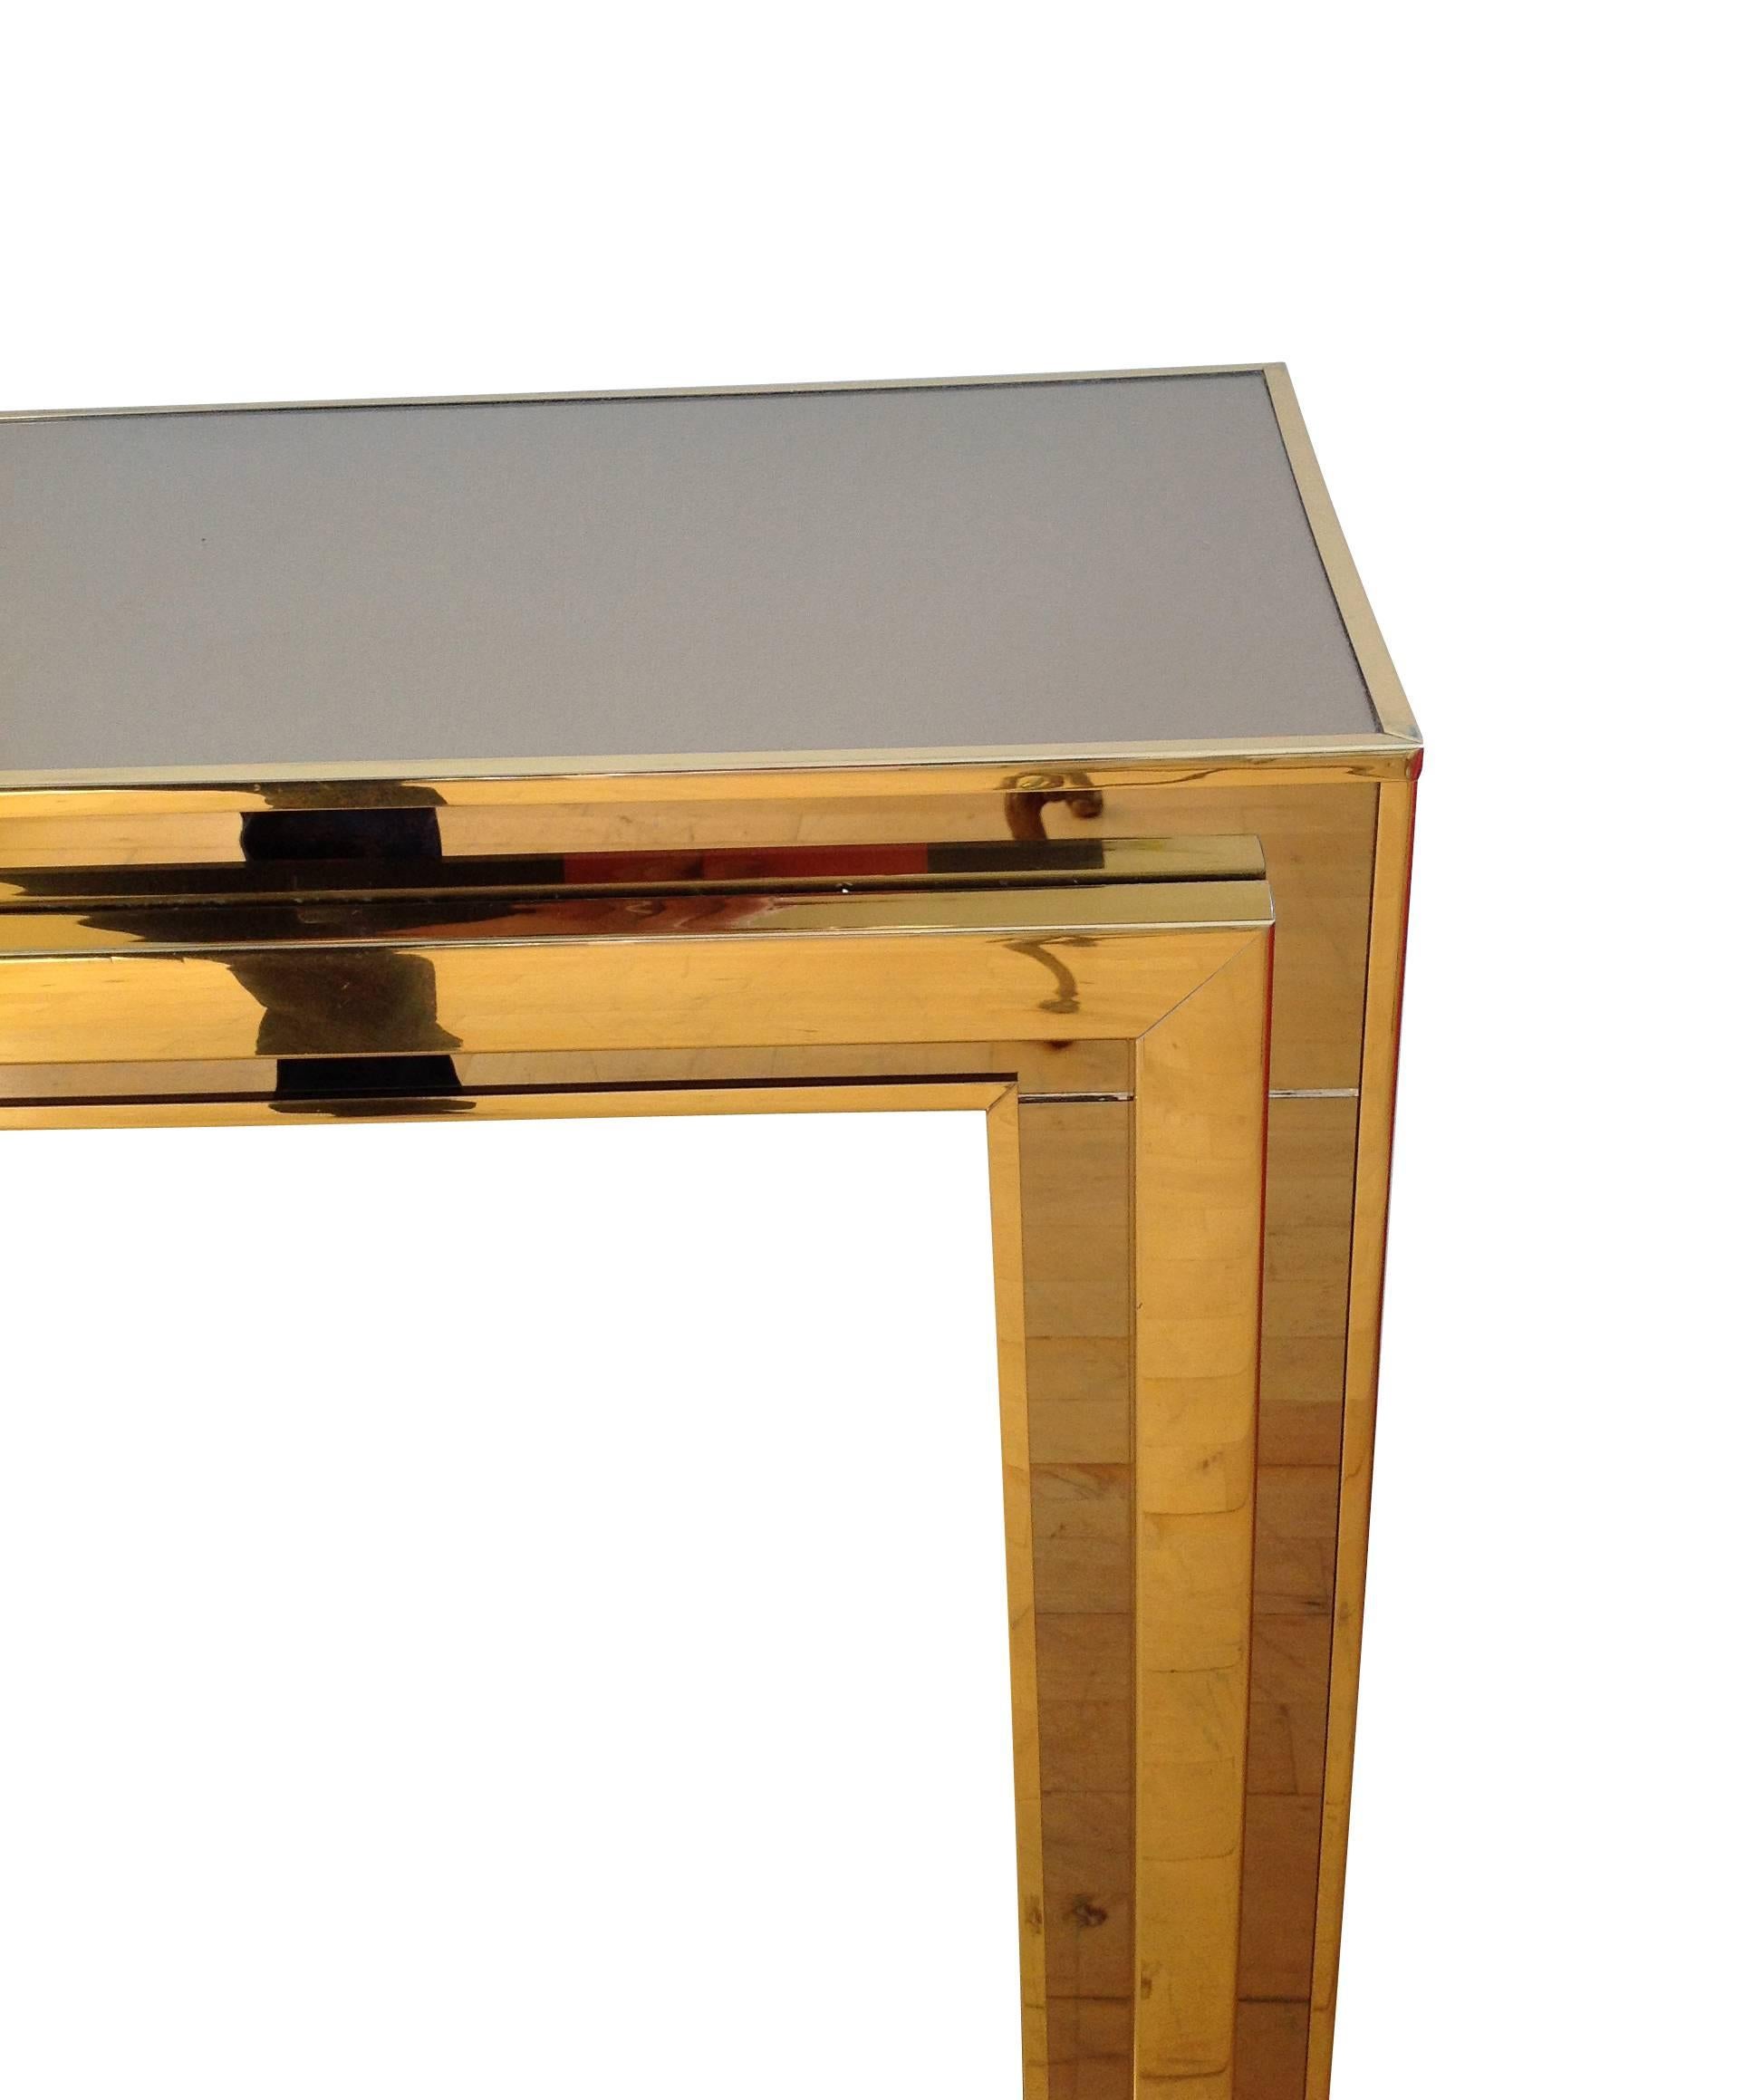 A smoked mirror and brass console, with mirrored top and legs, framed with a brass finish metal surround on all sides.